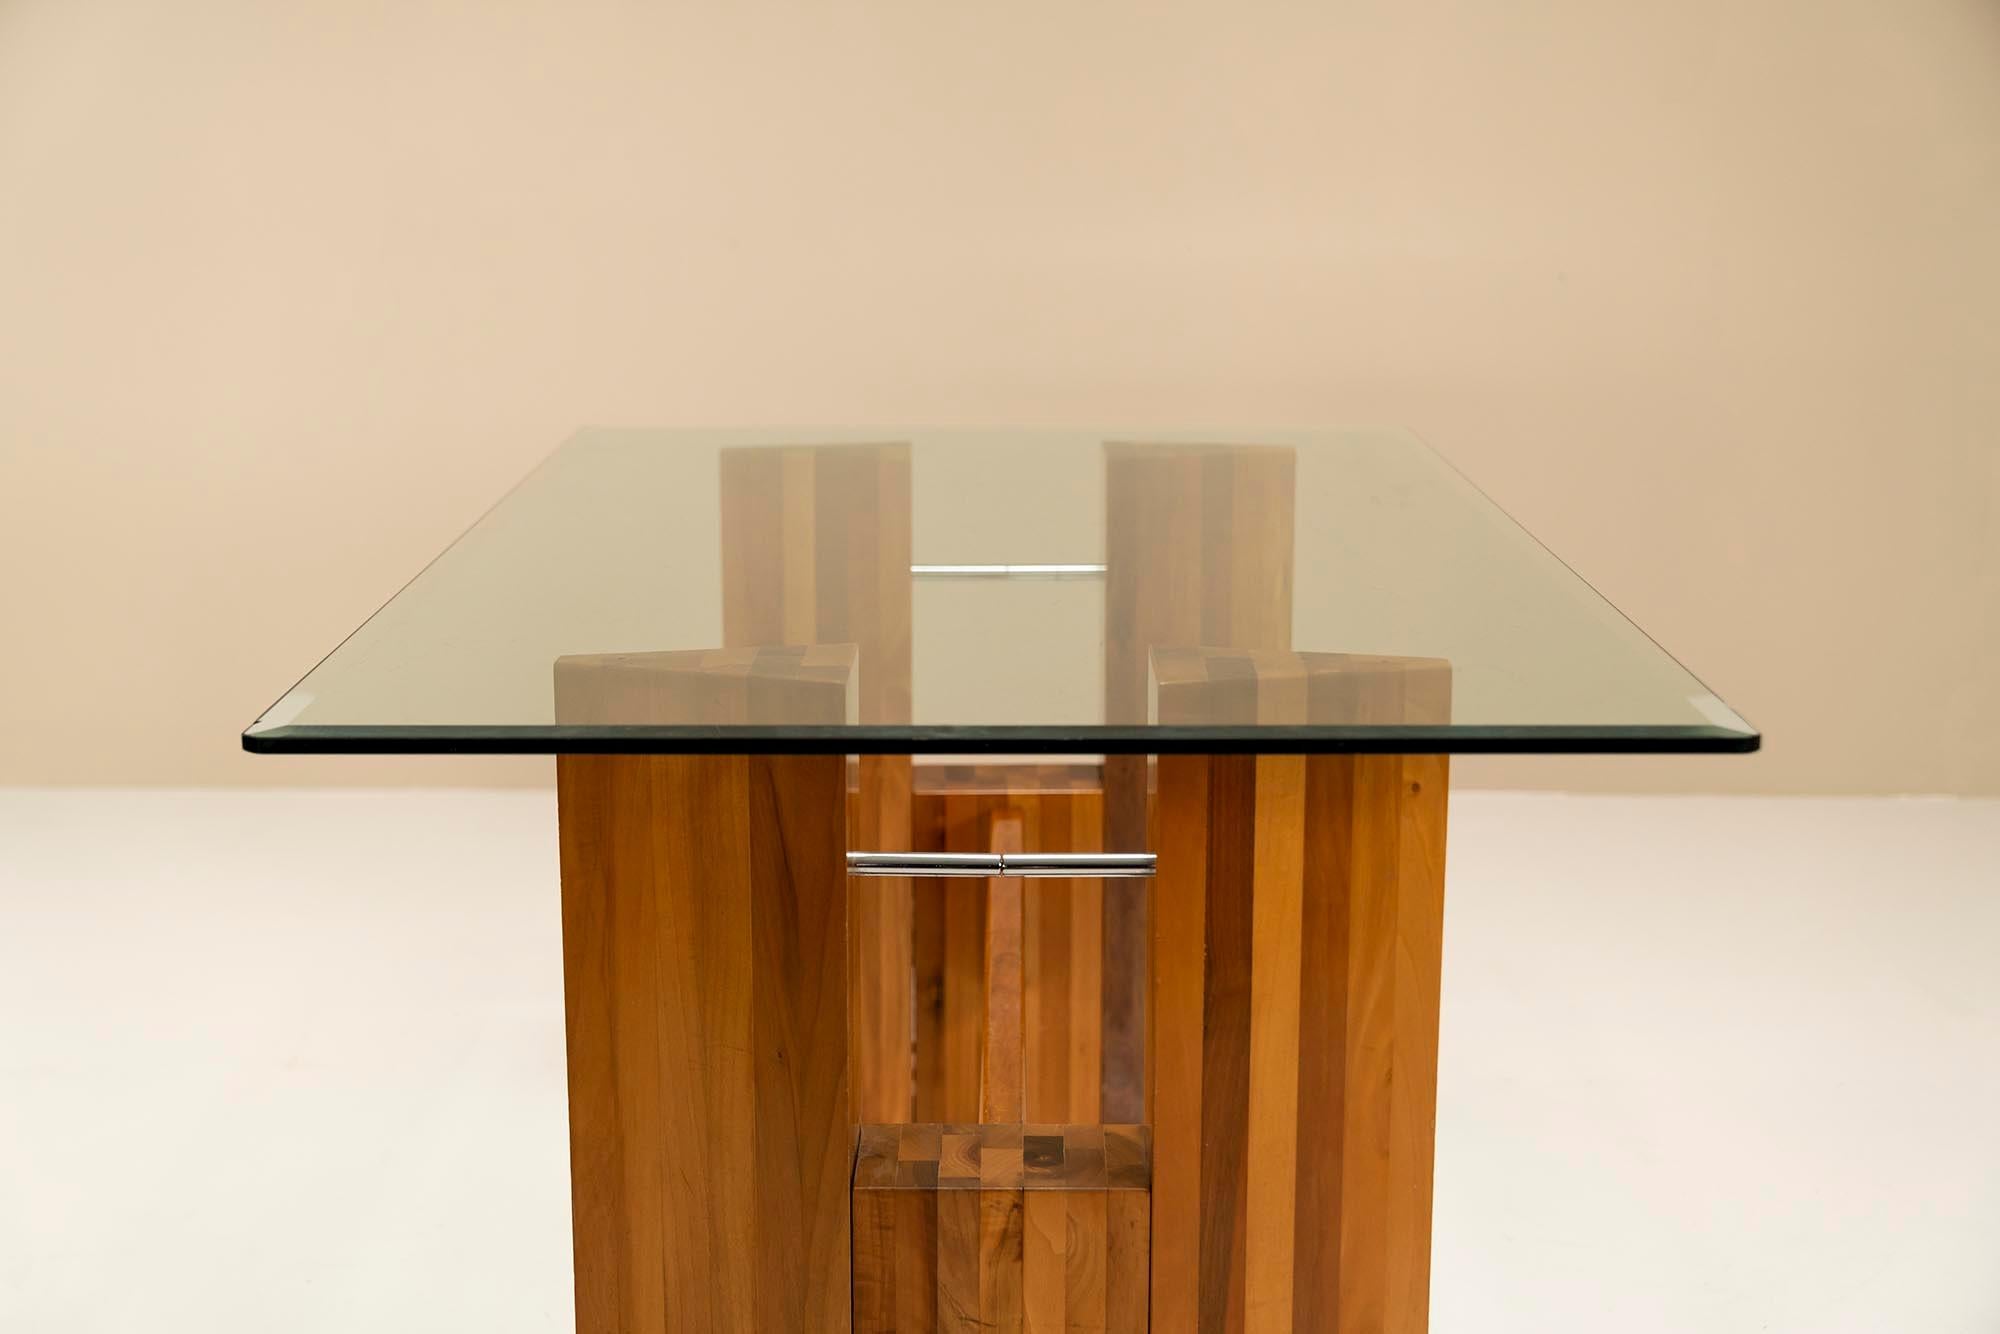 Architectural Table or Desk in Walnut and Glass, Italy 1970s For Sale 5